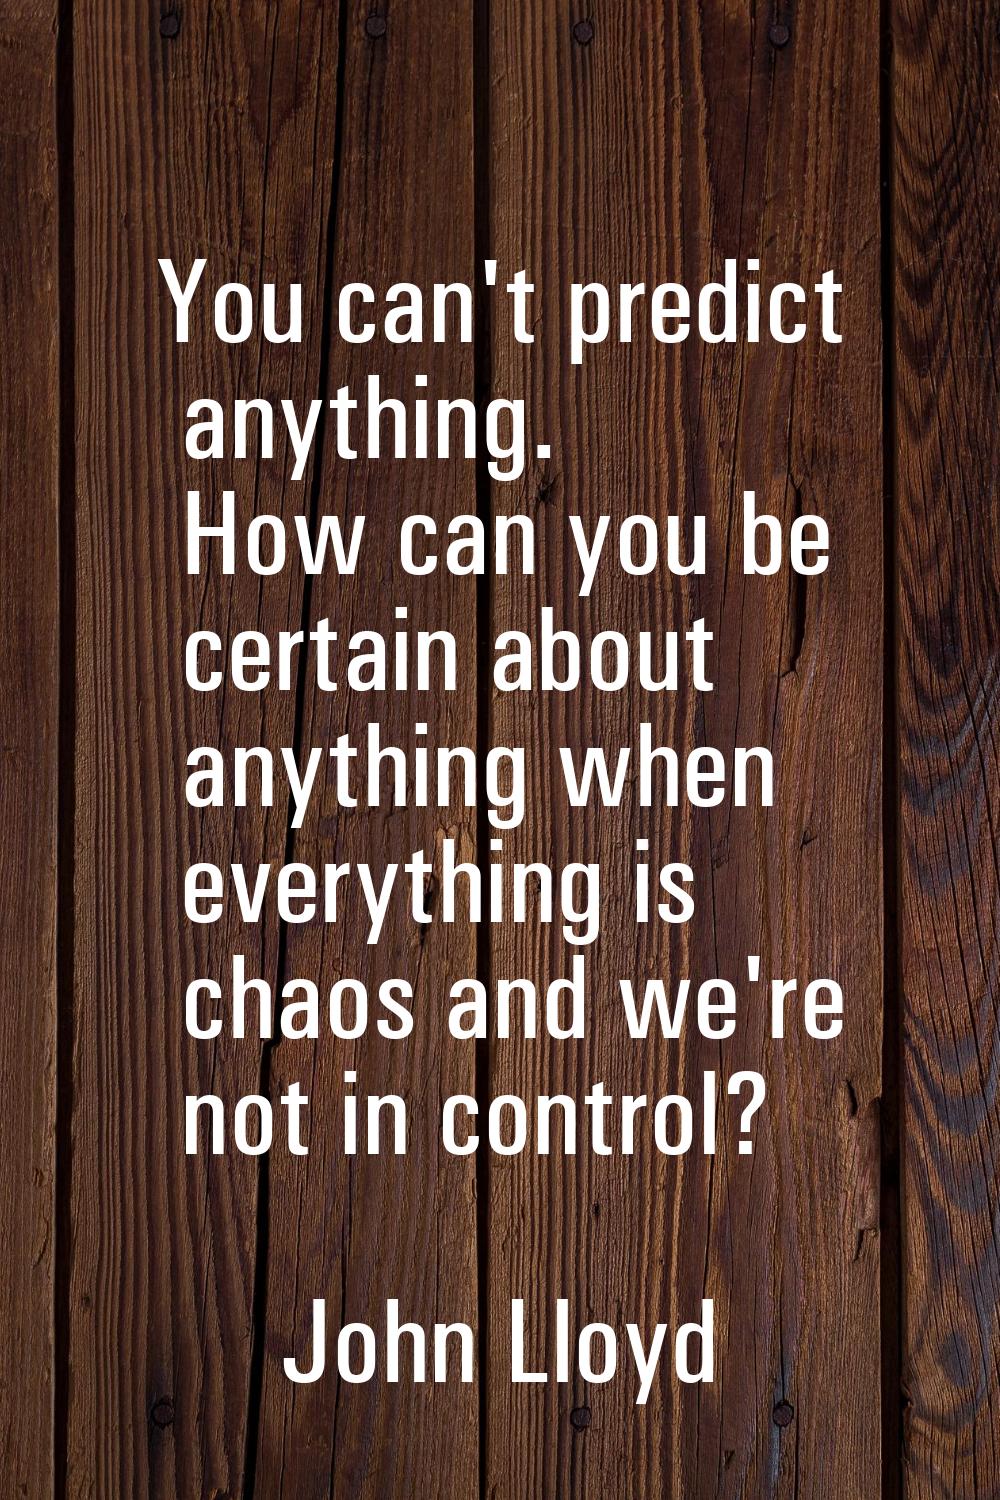 You can't predict anything. How can you be certain about anything when everything is chaos and we'r